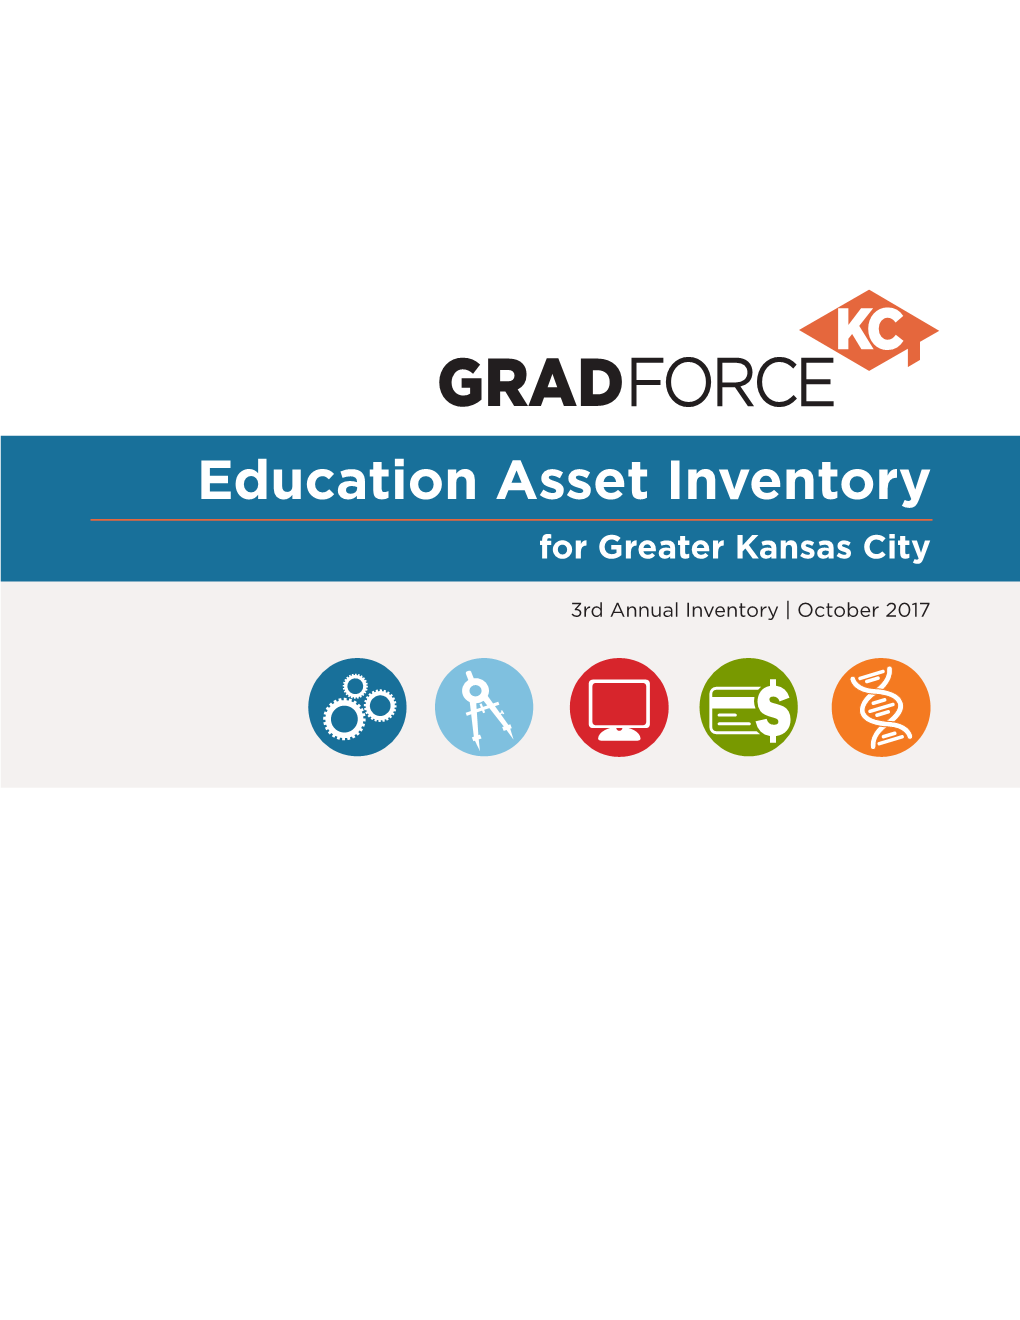 Education Asset Inventory for Greater Kansas City